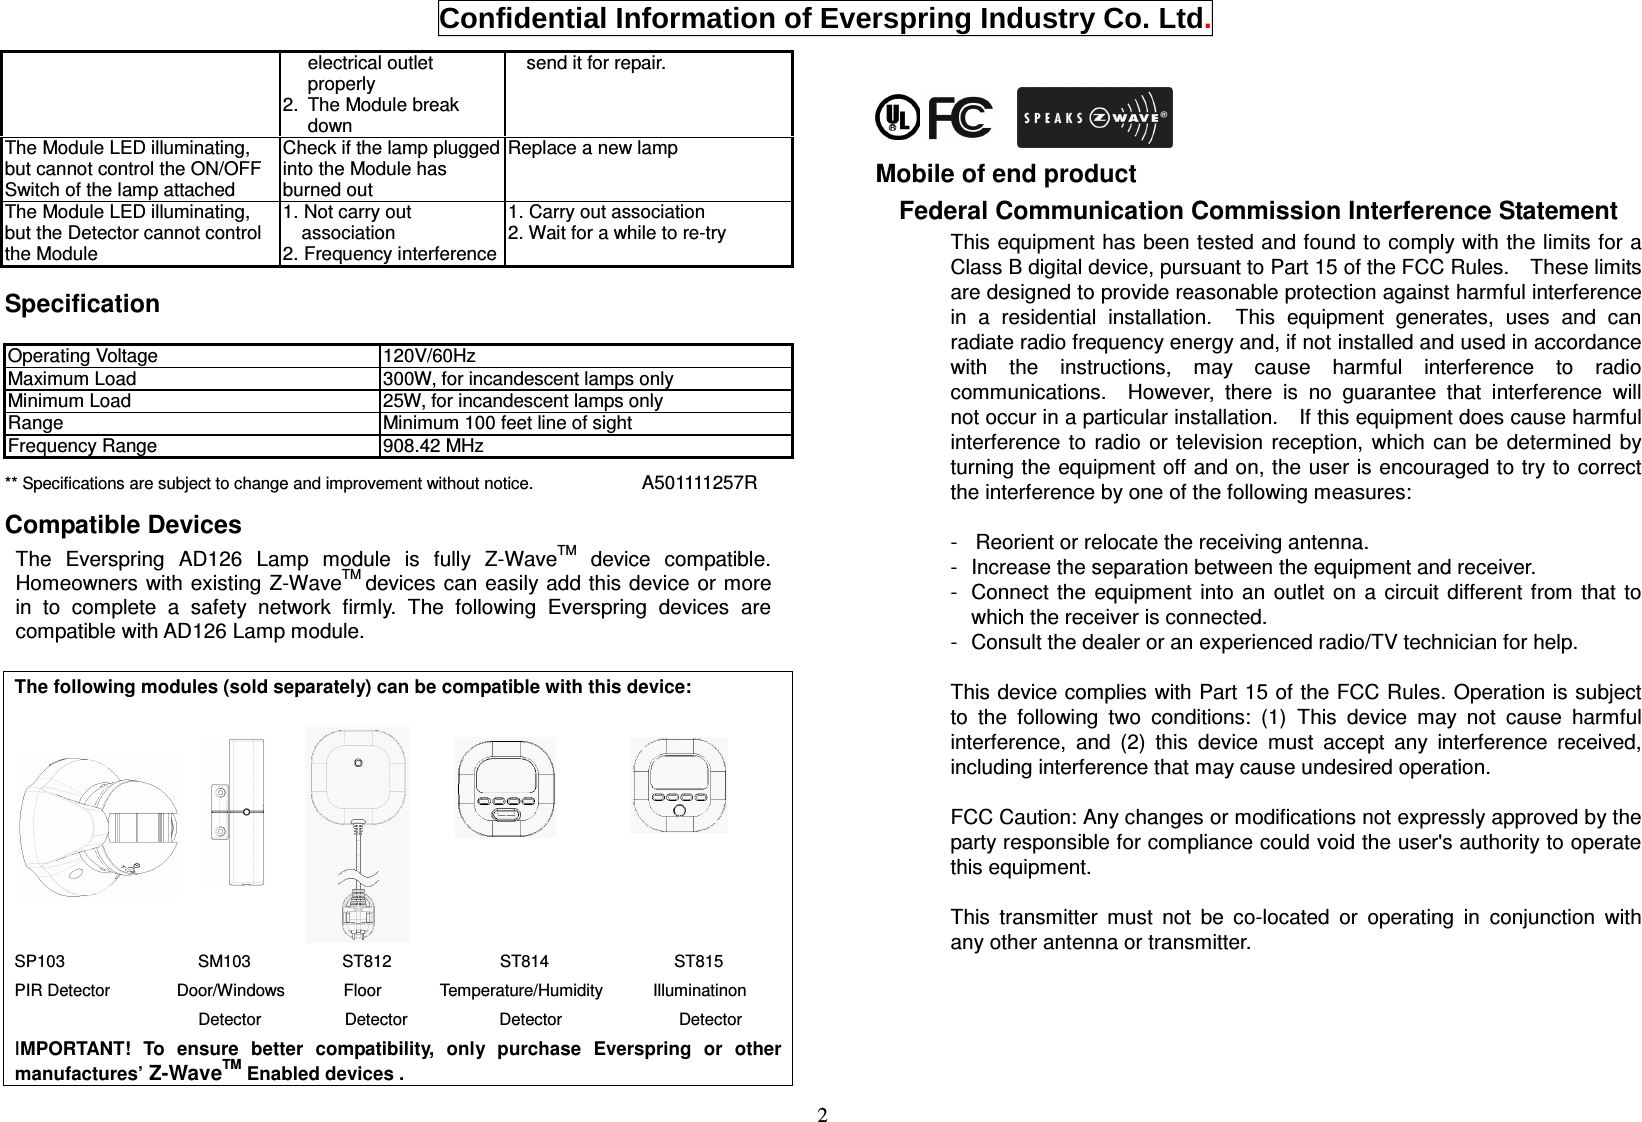  Confidential Information of Everspring Industry Co. Ltd. 2 electrical outlet properly 2.  The Module break down send it for repair. The Module LED illuminating, but cannot control the ON/OFF Switch of the lamp attached Check if the lamp plugged into the Module has burned out Replace a new lamp The Module LED illuminating, but the Detector cannot control the Module 1. Not carry out association 2. Frequency interference 1. Carry out association 2. Wait for a while to re-try  Specification  Operating Voltage  120V/60Hz Maximum Load  300W, for incandescent lamps only Minimum Load  25W, for incandescent lamps only Range  Minimum 100 feet line of sight Frequency Range  908.42 MHz ** Specifications are subject to change and improvement without notice.                          A501111257R     Compatible Devices   The  Everspring  AD126  Lamp  module  is  fully  Z-WaveTM  device  compatible. Homeowners with existing Z-WaveTM devices can easily add this device  or more in  to  complete  a  safety  network  firmly.  The  following  Everspring  devices  are compatible with AD126 Lamp module.  The following modules (sold separately) can be compatible with this device:                                                                               SP103                                SM103                      ST812                          ST814                              ST815 PIR Detector                Door/Windows              Floor              Temperature/Humidity            Illuminatinon   Detector                    Detector                      Detector                            Detector IMPORTANT!  To  ensure  better  compatibility,  only  purchase  Everspring  or  other manufactures’ Z-WaveTM Enabled devices .     Mobile of end product Federal Communication Commission Interference Statement This equipment has been tested and found to comply with the limits for a Class B digital device, pursuant to Part 15 of the FCC Rules.    These limits are designed to provide reasonable protection against harmful interference in  a  residential  installation.    This  equipment  generates,  uses  and  can radiate radio frequency energy and, if not installed and used in accordance with  the  instructions,  may  cause  harmful  interference  to  radio communications.    However,  there  is  no  guarantee  that  interference  will not occur in a particular installation.    If this equipment does cause harmful interference  to  radio  or  television  reception,  which  can  be  determined  by turning the equipment off and on, the user is encouraged to try to correct the interference by one of the following measures:  -  Reorient or relocate the receiving antenna. -   Increase the separation between the equipment and receiver. -  Connect the  equipment  into  an  outlet  on  a circuit different  from  that  to which the receiver is connected. -  Consult the dealer or an experienced radio/TV technician for help.  This device complies with Part 15 of the FCC Rules. Operation is subject to  the  following  two  conditions:  (1)  This  device  may  not  cause  harmful interference,  and  (2)  this  device  must  accept  any  interference  received, including interference that may cause undesired operation.  FCC Caution: Any changes or modifications not expressly approved by the party responsible for compliance could void the user&apos;s authority to operate this equipment.  This  transmitter  must  not  be  co-located  or  operating  in  conjunction  with any other antenna or transmitter. 